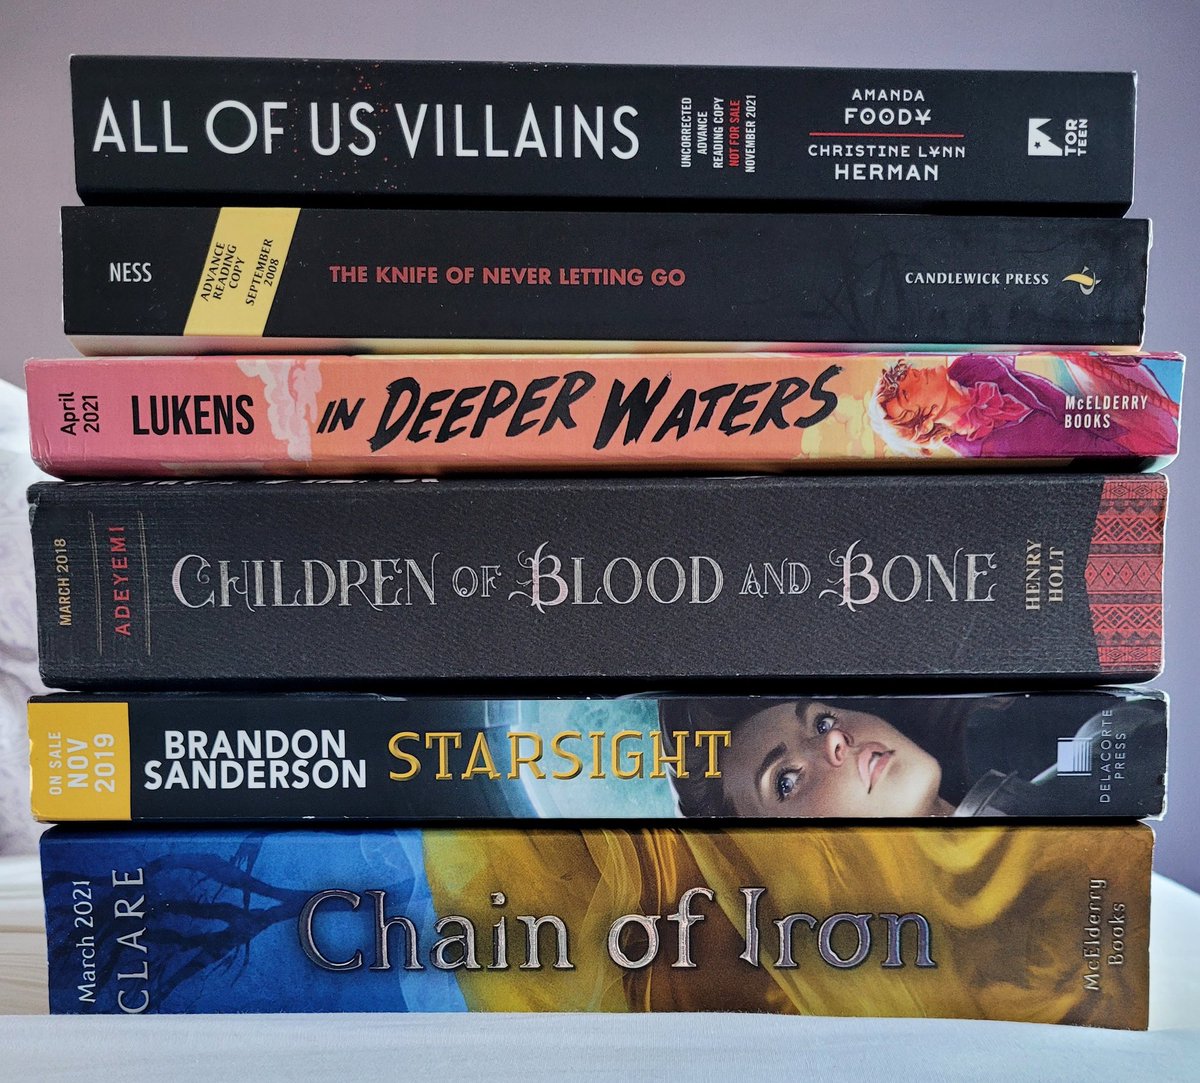 New to book twitter, but im interested in trading these arcs! don't have a wl, dm if you're interested #arcsfortrade #booksfortrade